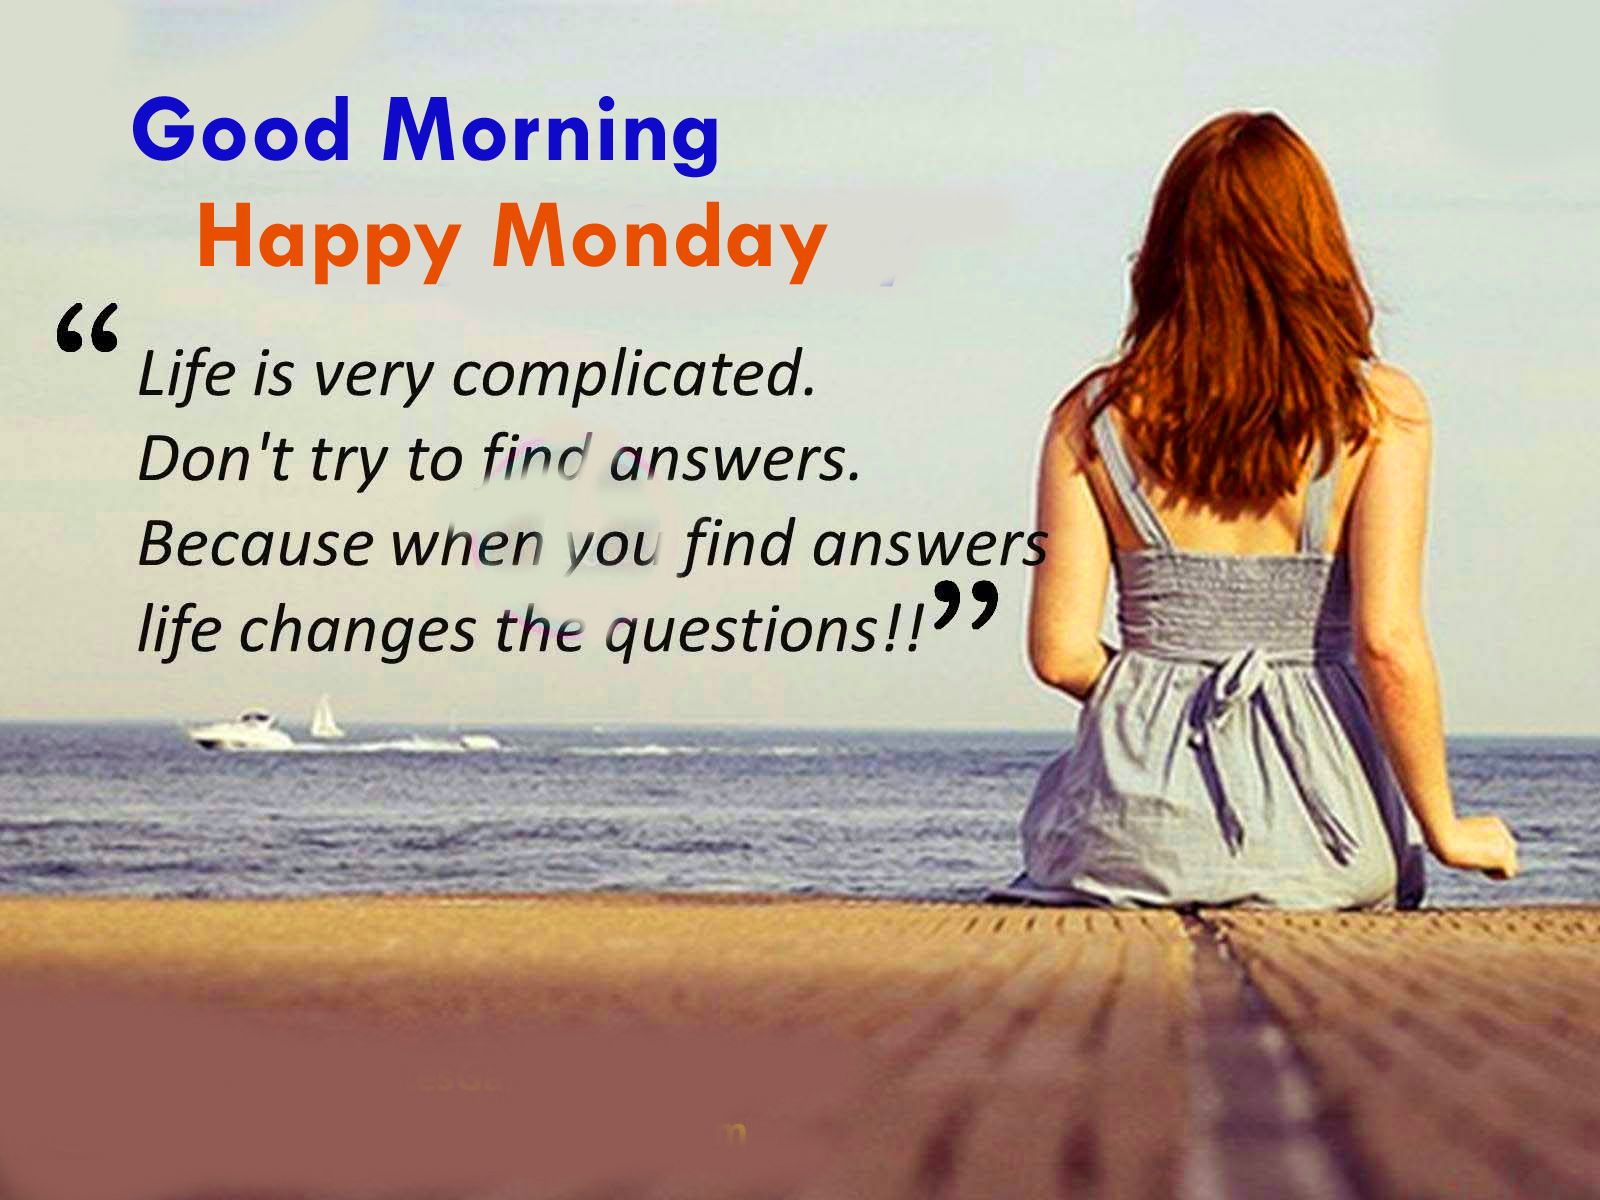 Don t try your best. Good morning цитаты. Good Life цитаты. Good morning Monday. Good morning Happy Monday.